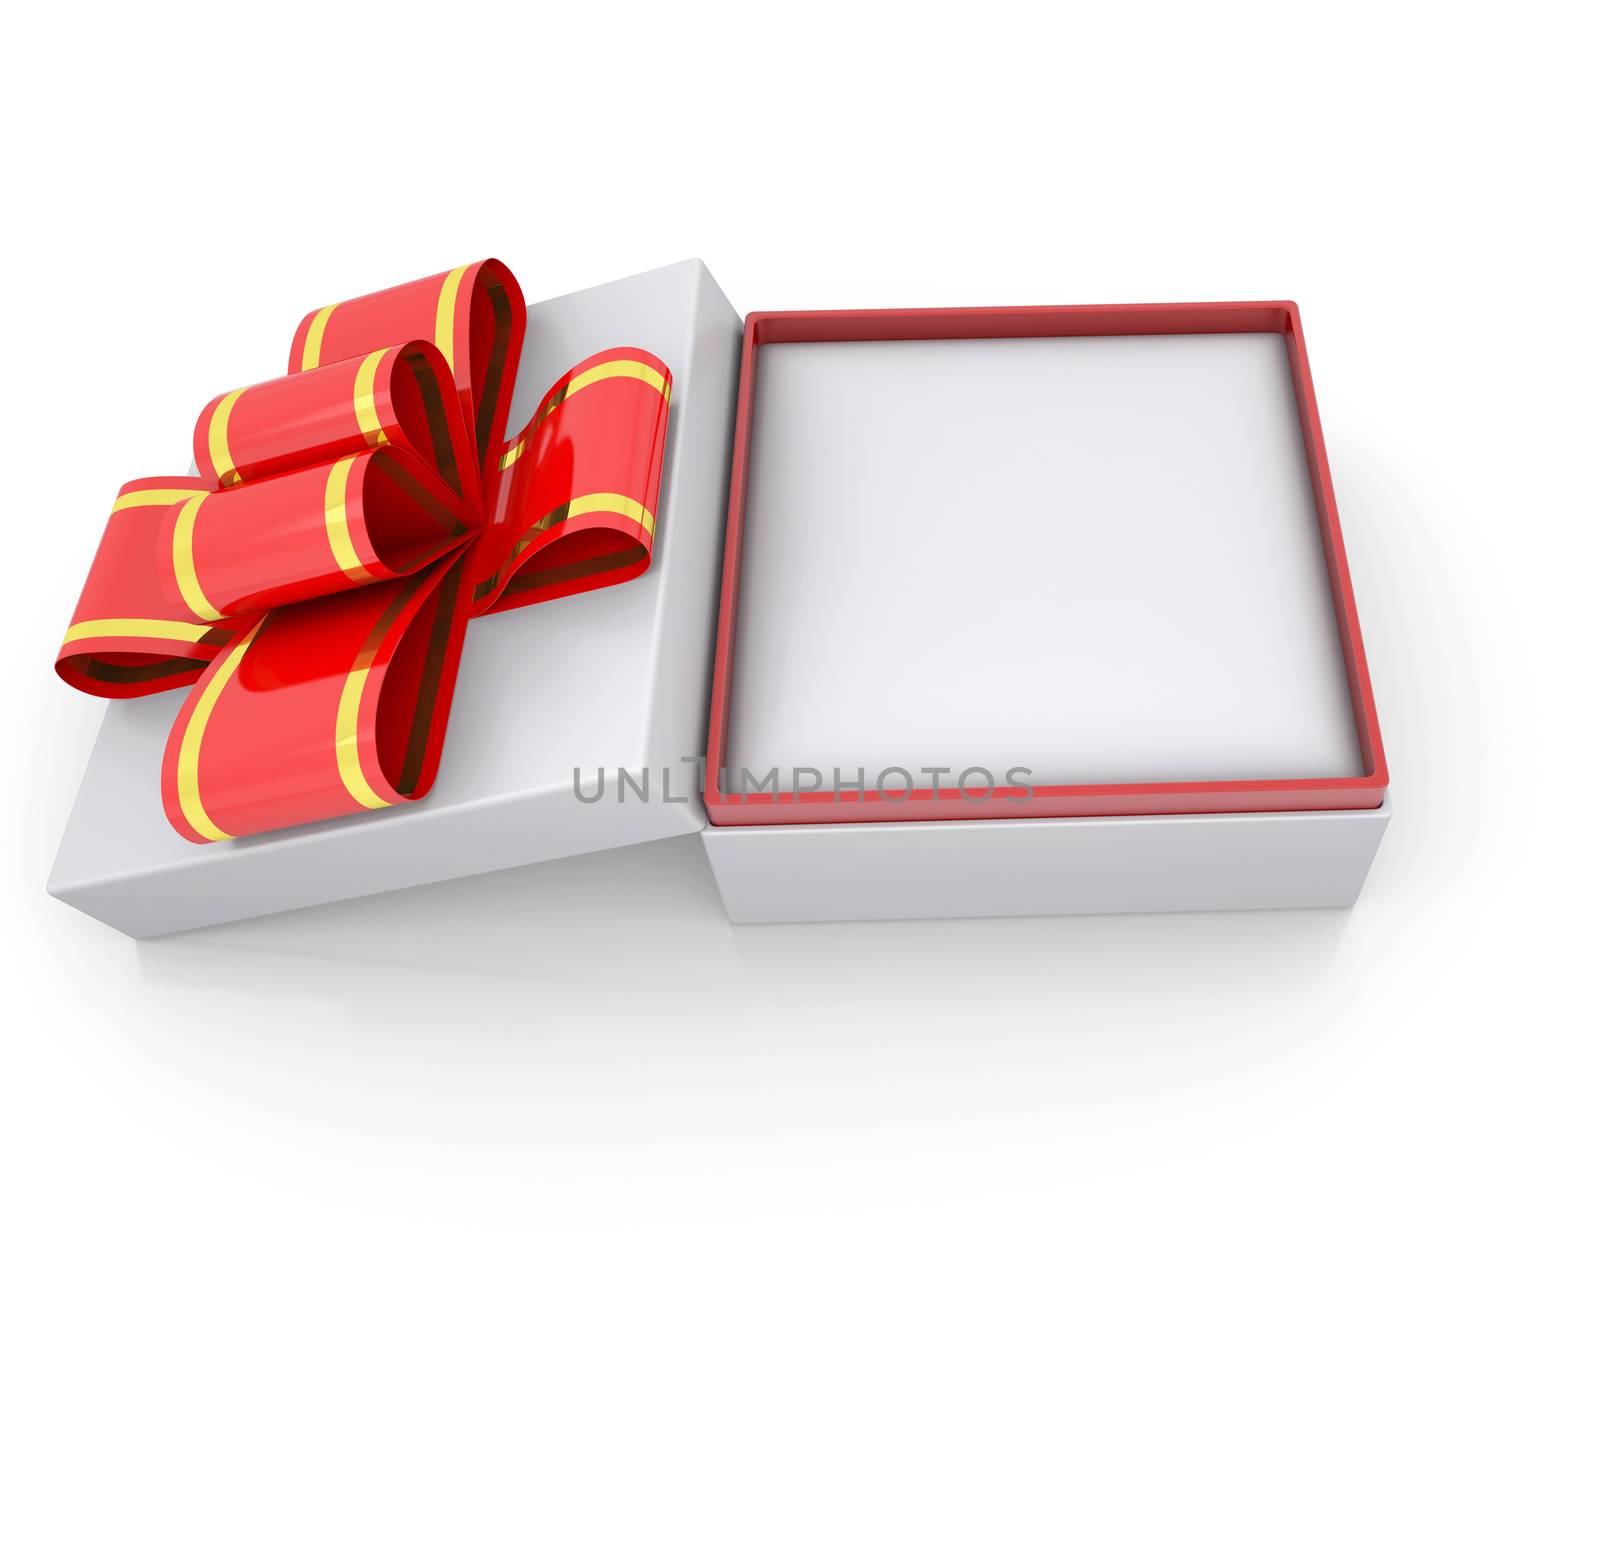 Jewelry box with a ribbon. Isolated render on a white background